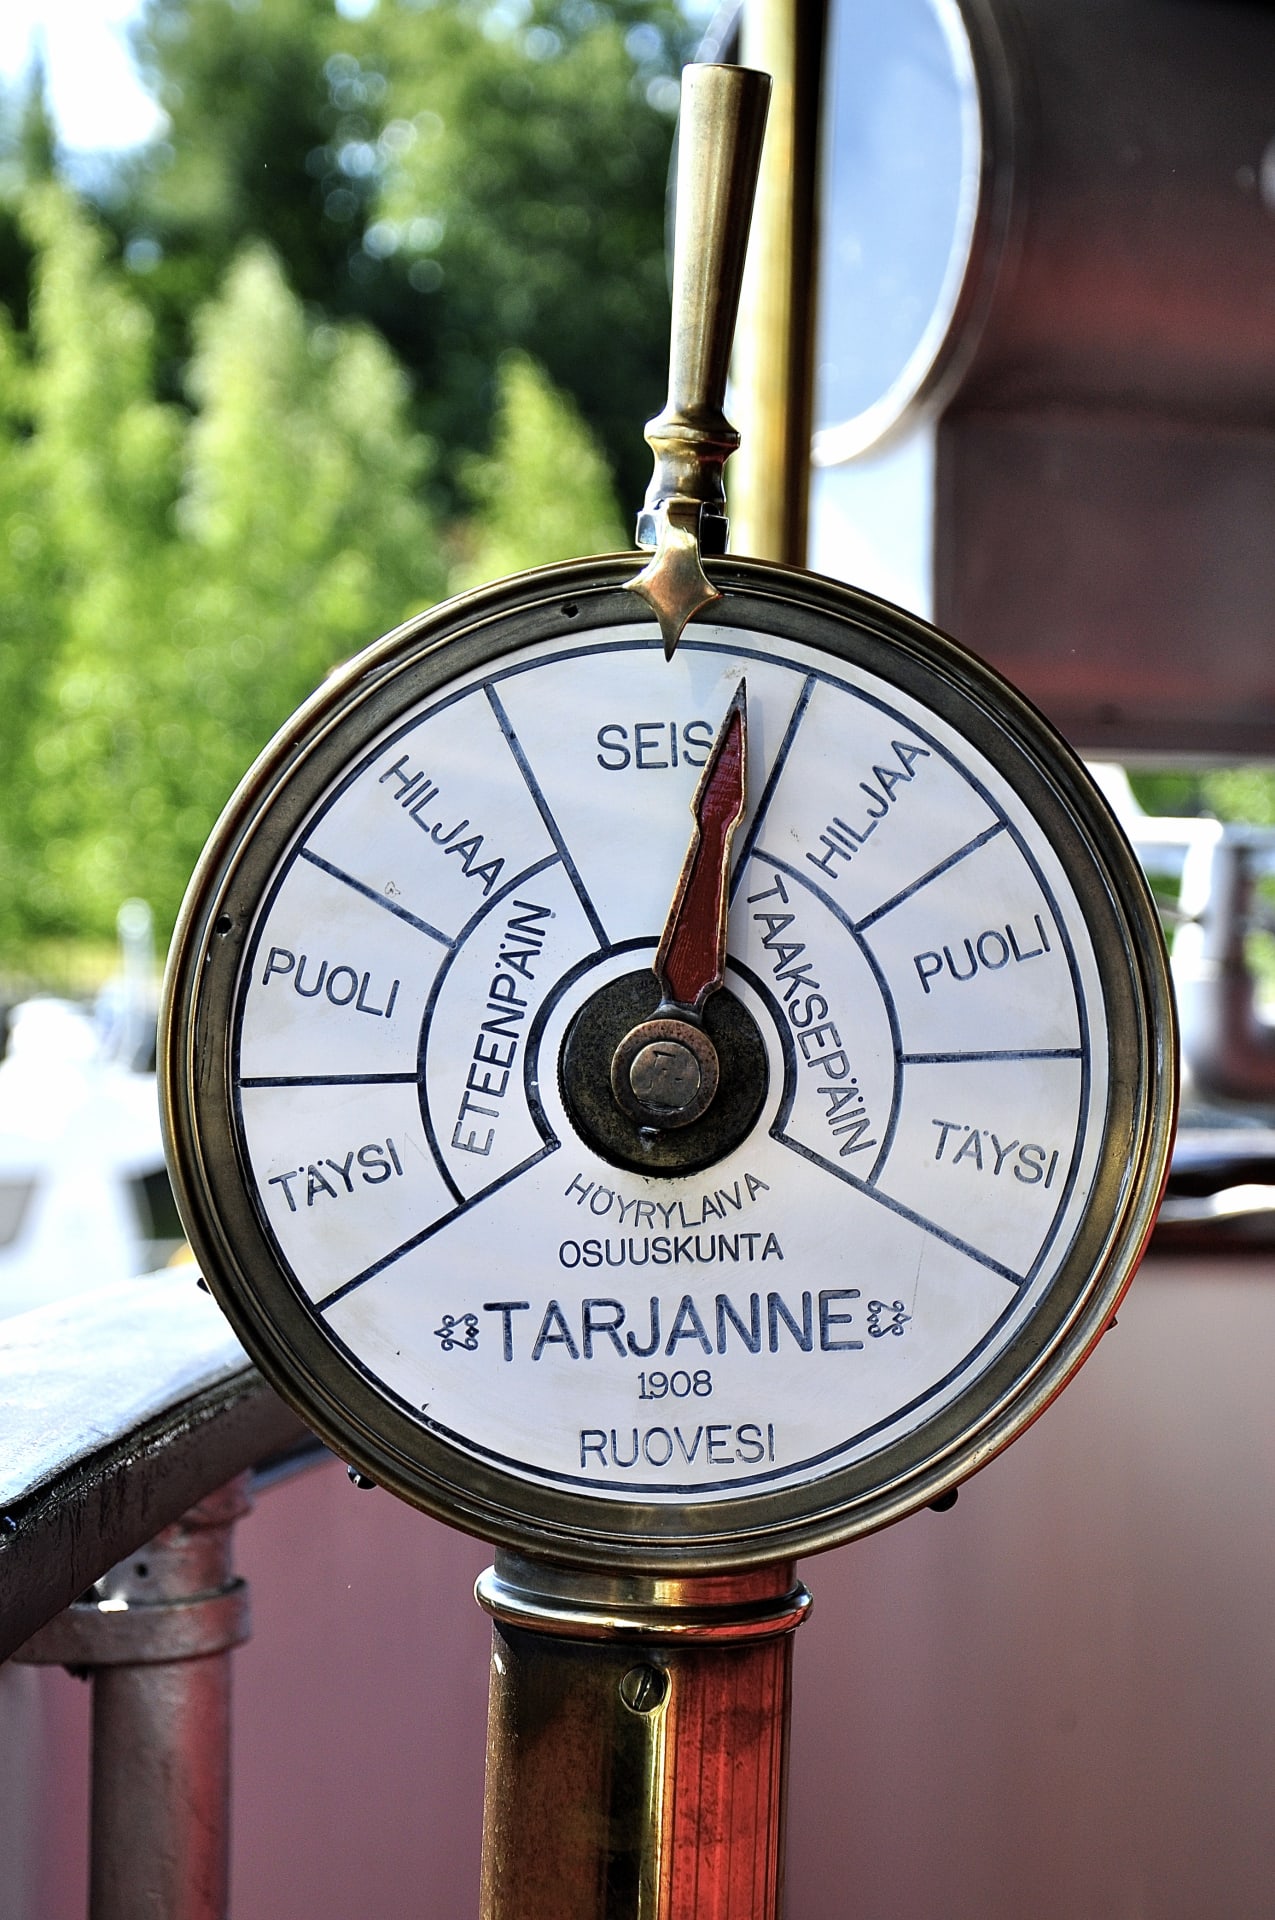 Travel aboard a real steamship